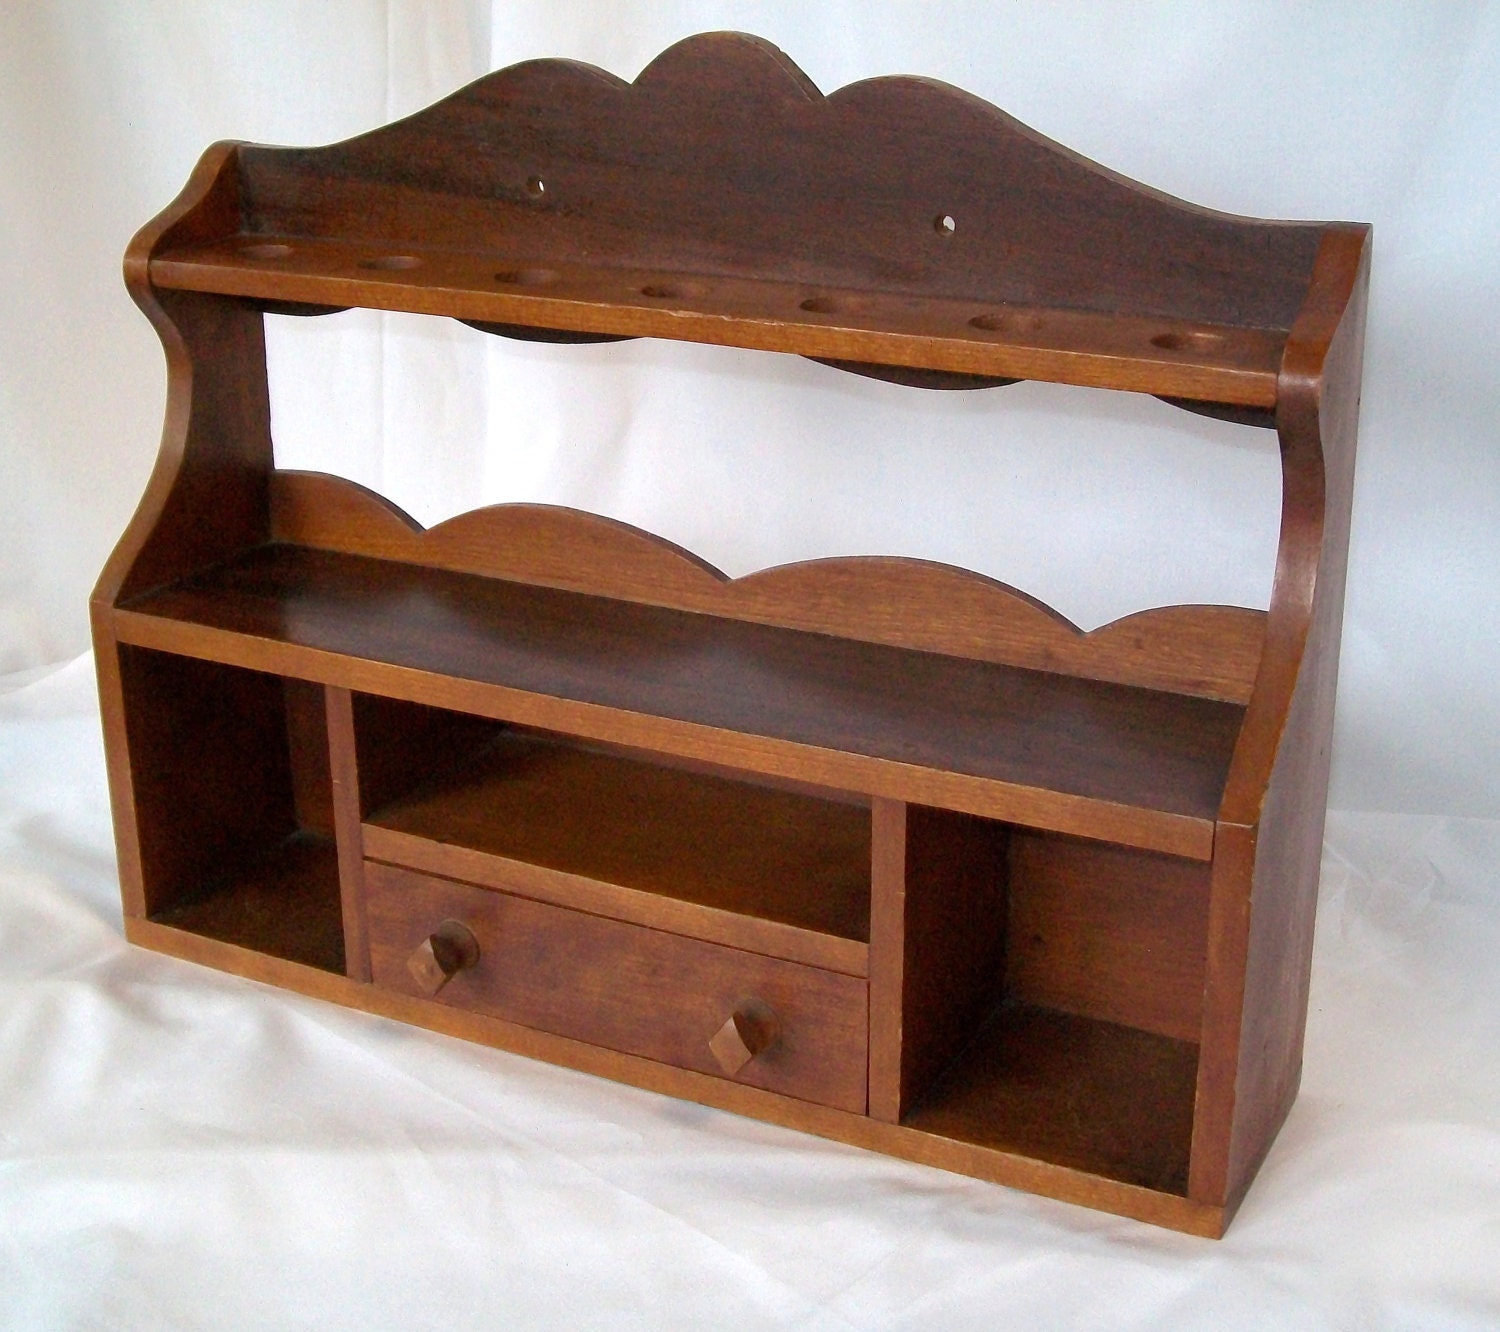 Antique Pipe Stand Vintage Wooden Shelf with Drawer Wall